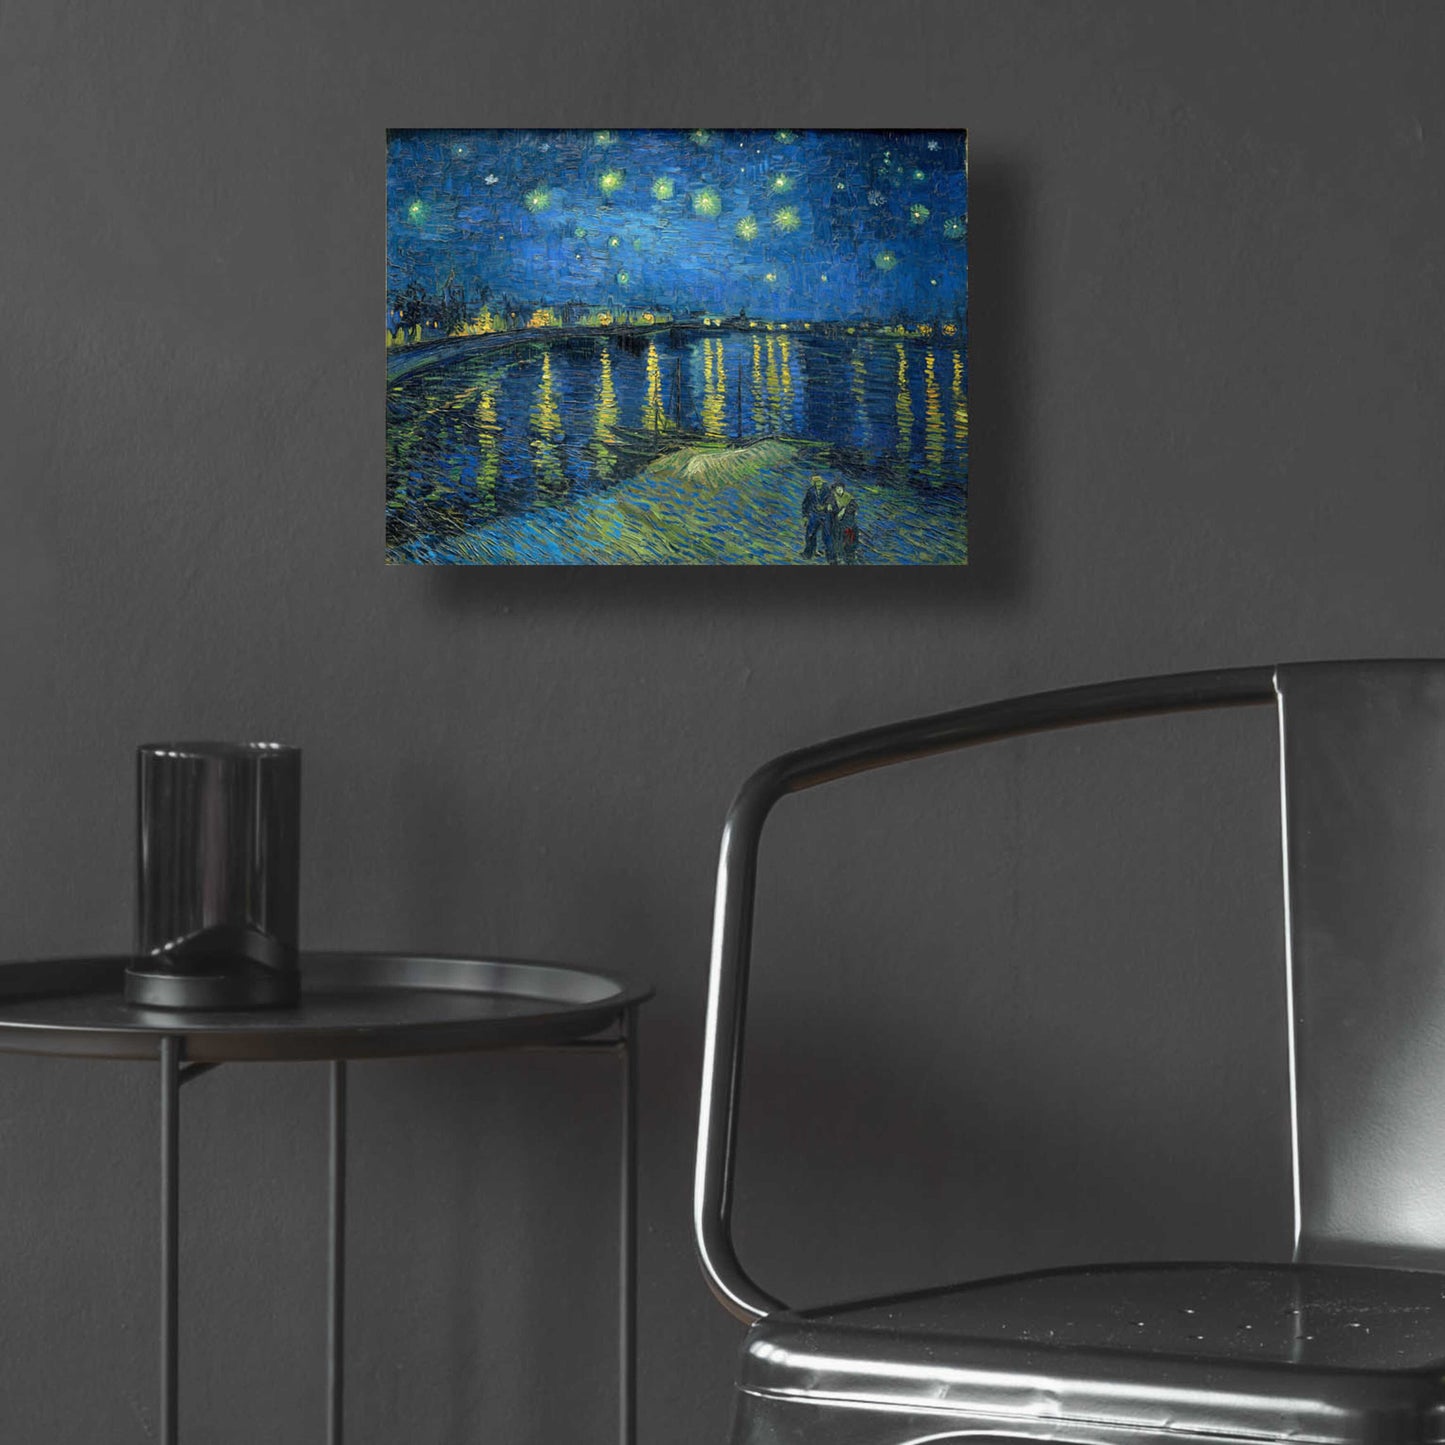 Epic Art 'Starry Night Over the Rhone' by Vincent VanGogh, Acrylic Glass Wall Art,16x12